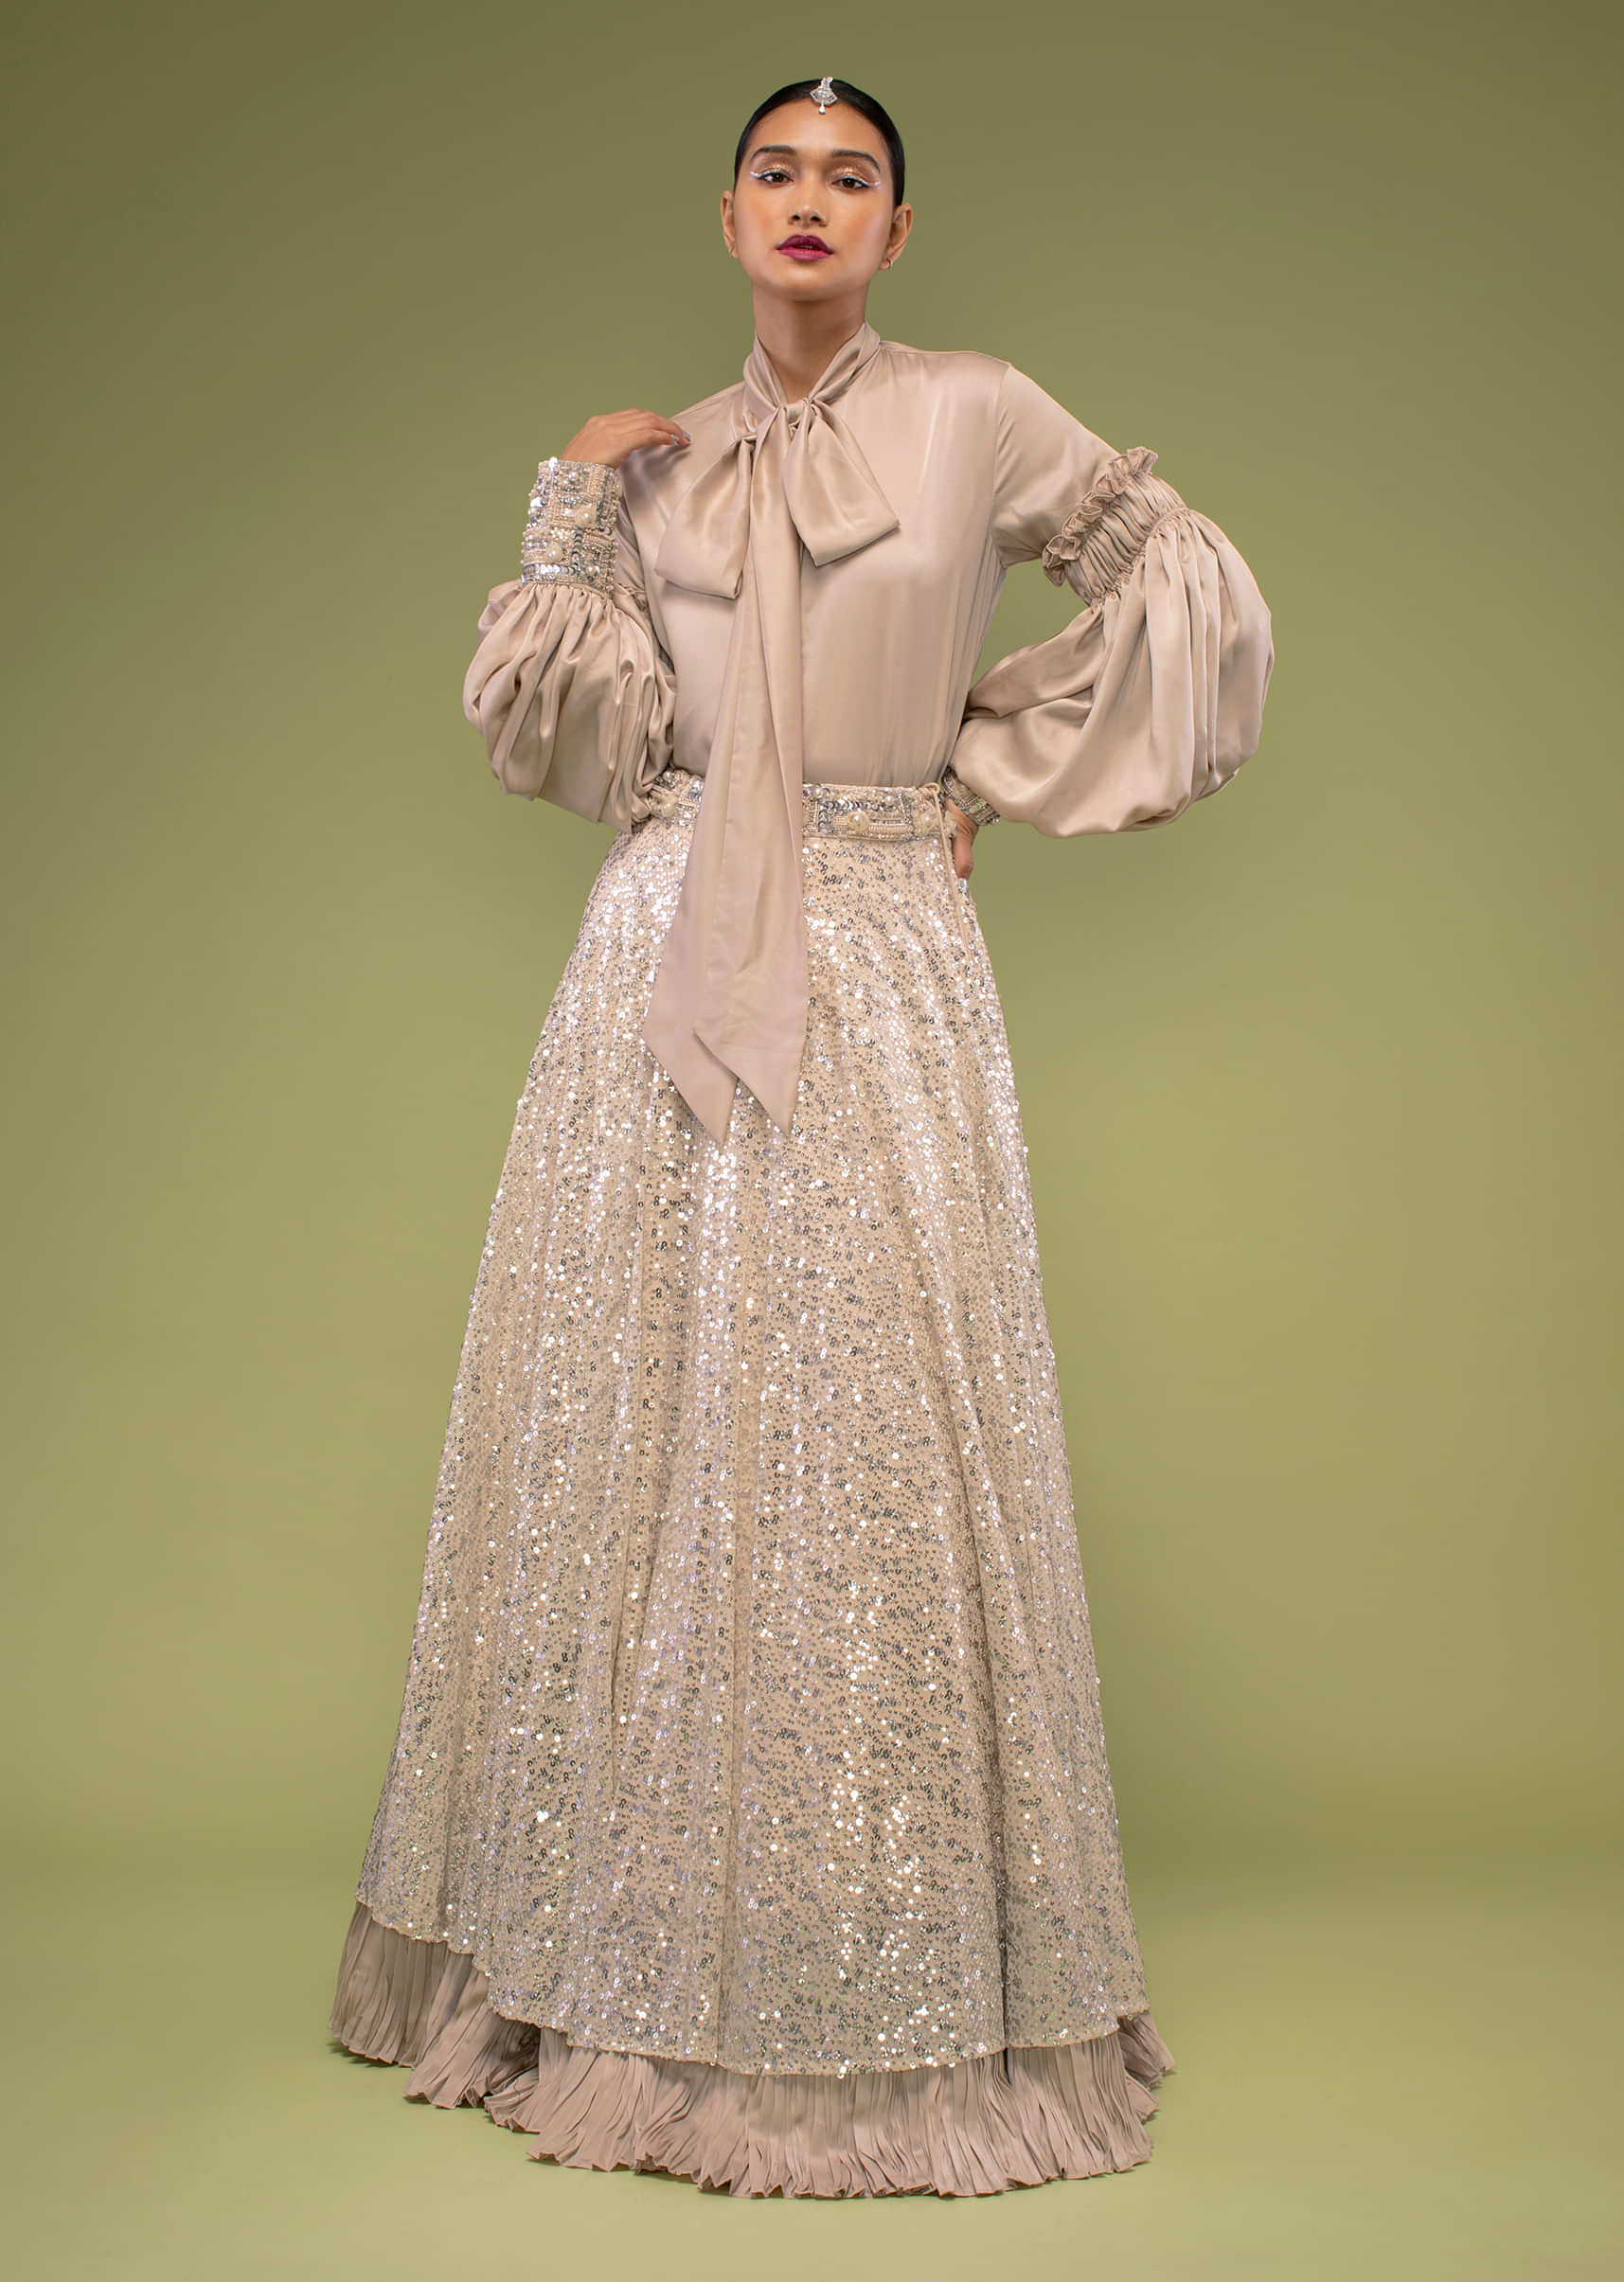 English Beige Shirt And Ivory Lehenga In Sequins Embroidery, Shirt Is Crafted In Satin With A Bow Tie-Up At The Front